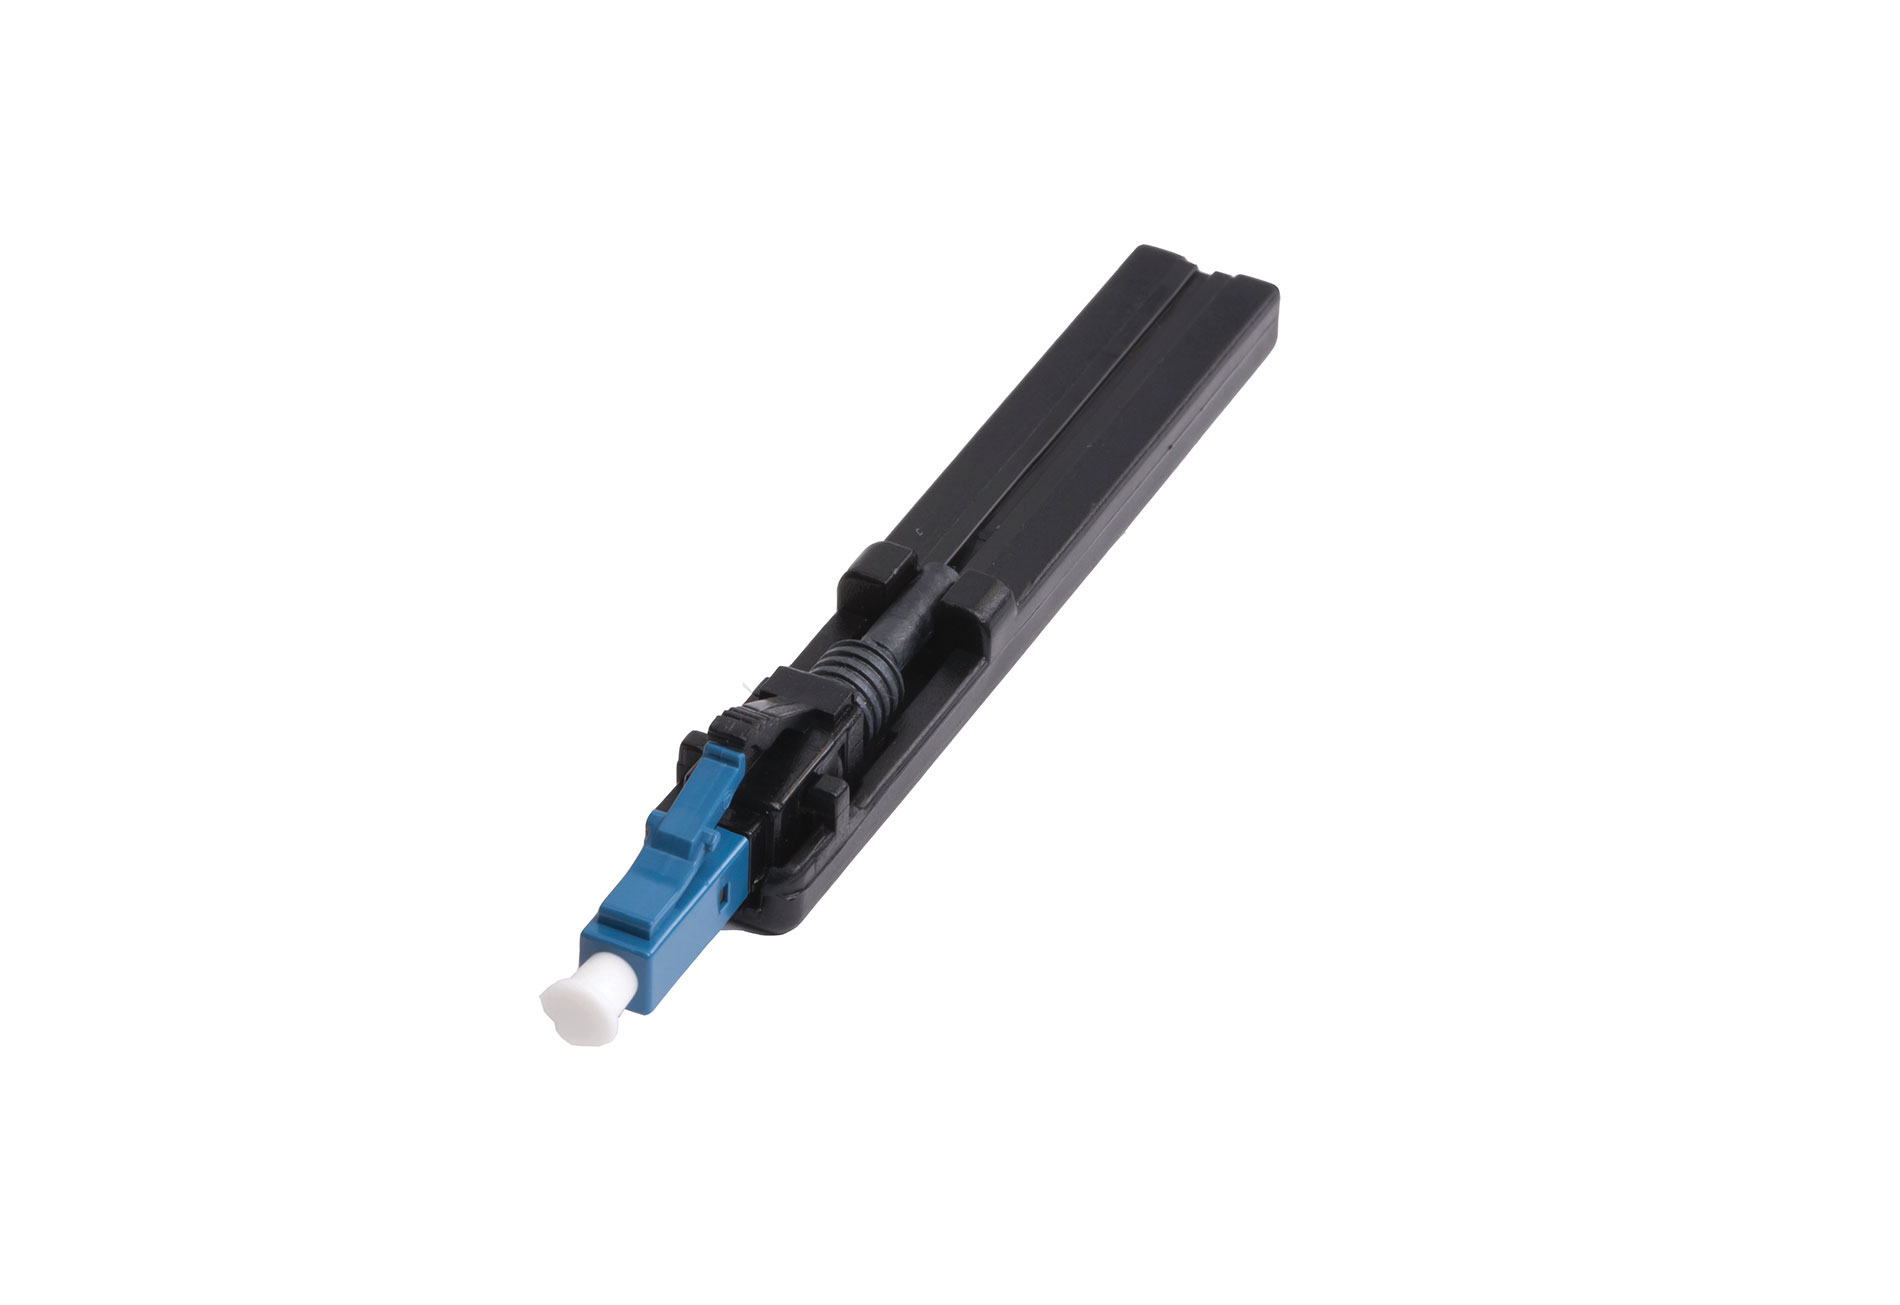 Black and blue connector. Image by Hyperline.